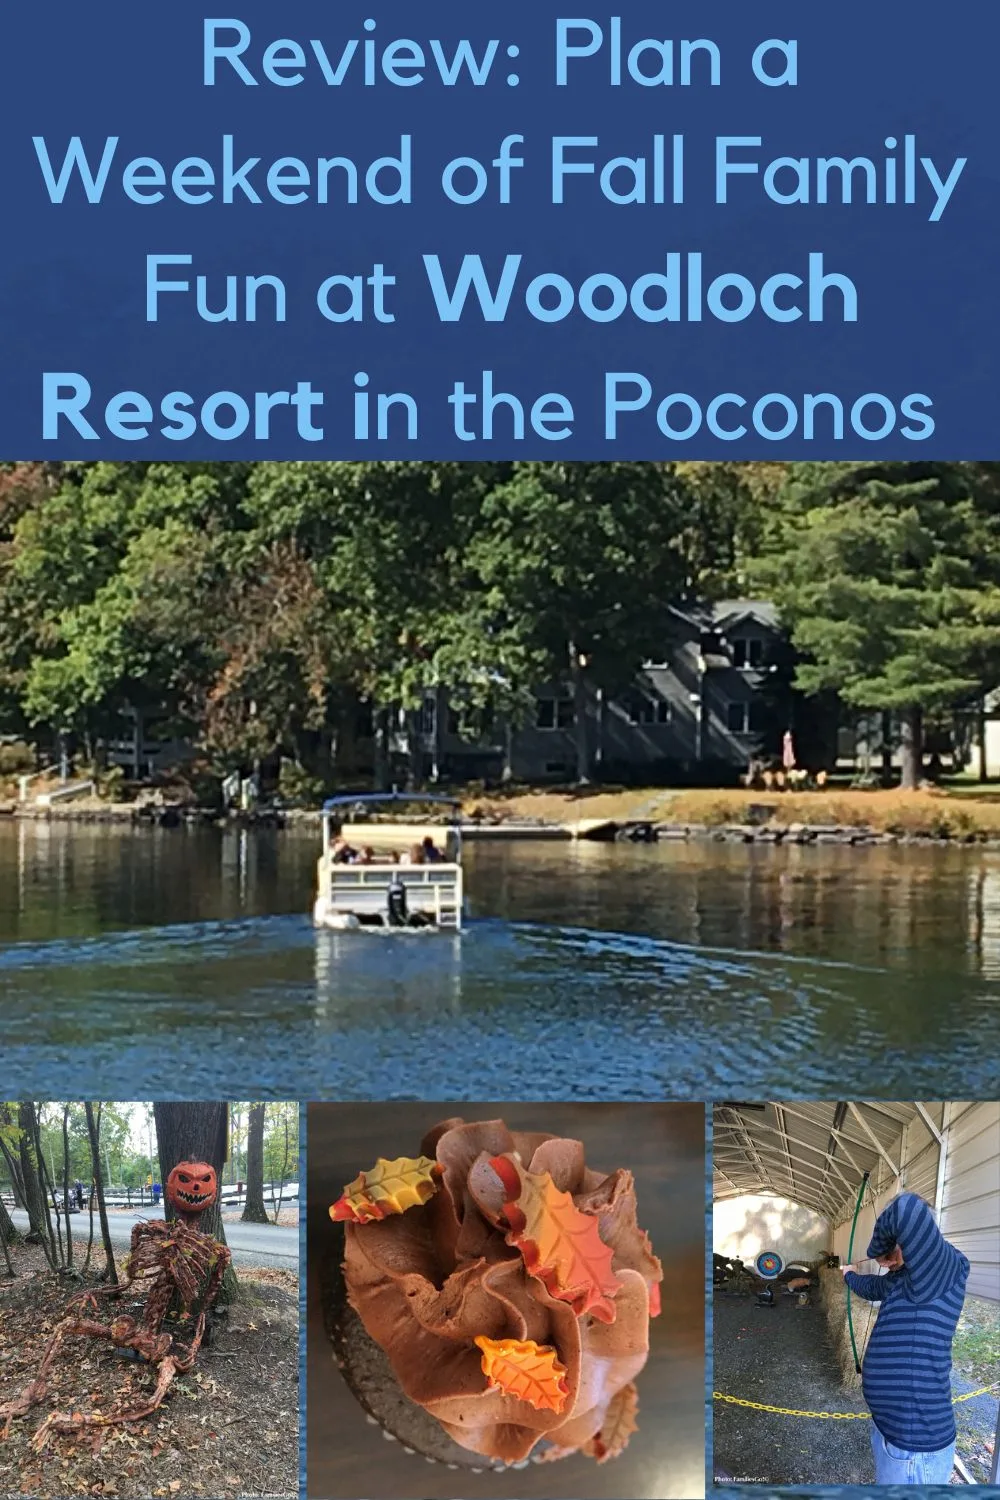 a review of woodloch pines, an all-inclusive resort in the poconos, pa. here's what we liked and didn't on our fall weekend getaway.